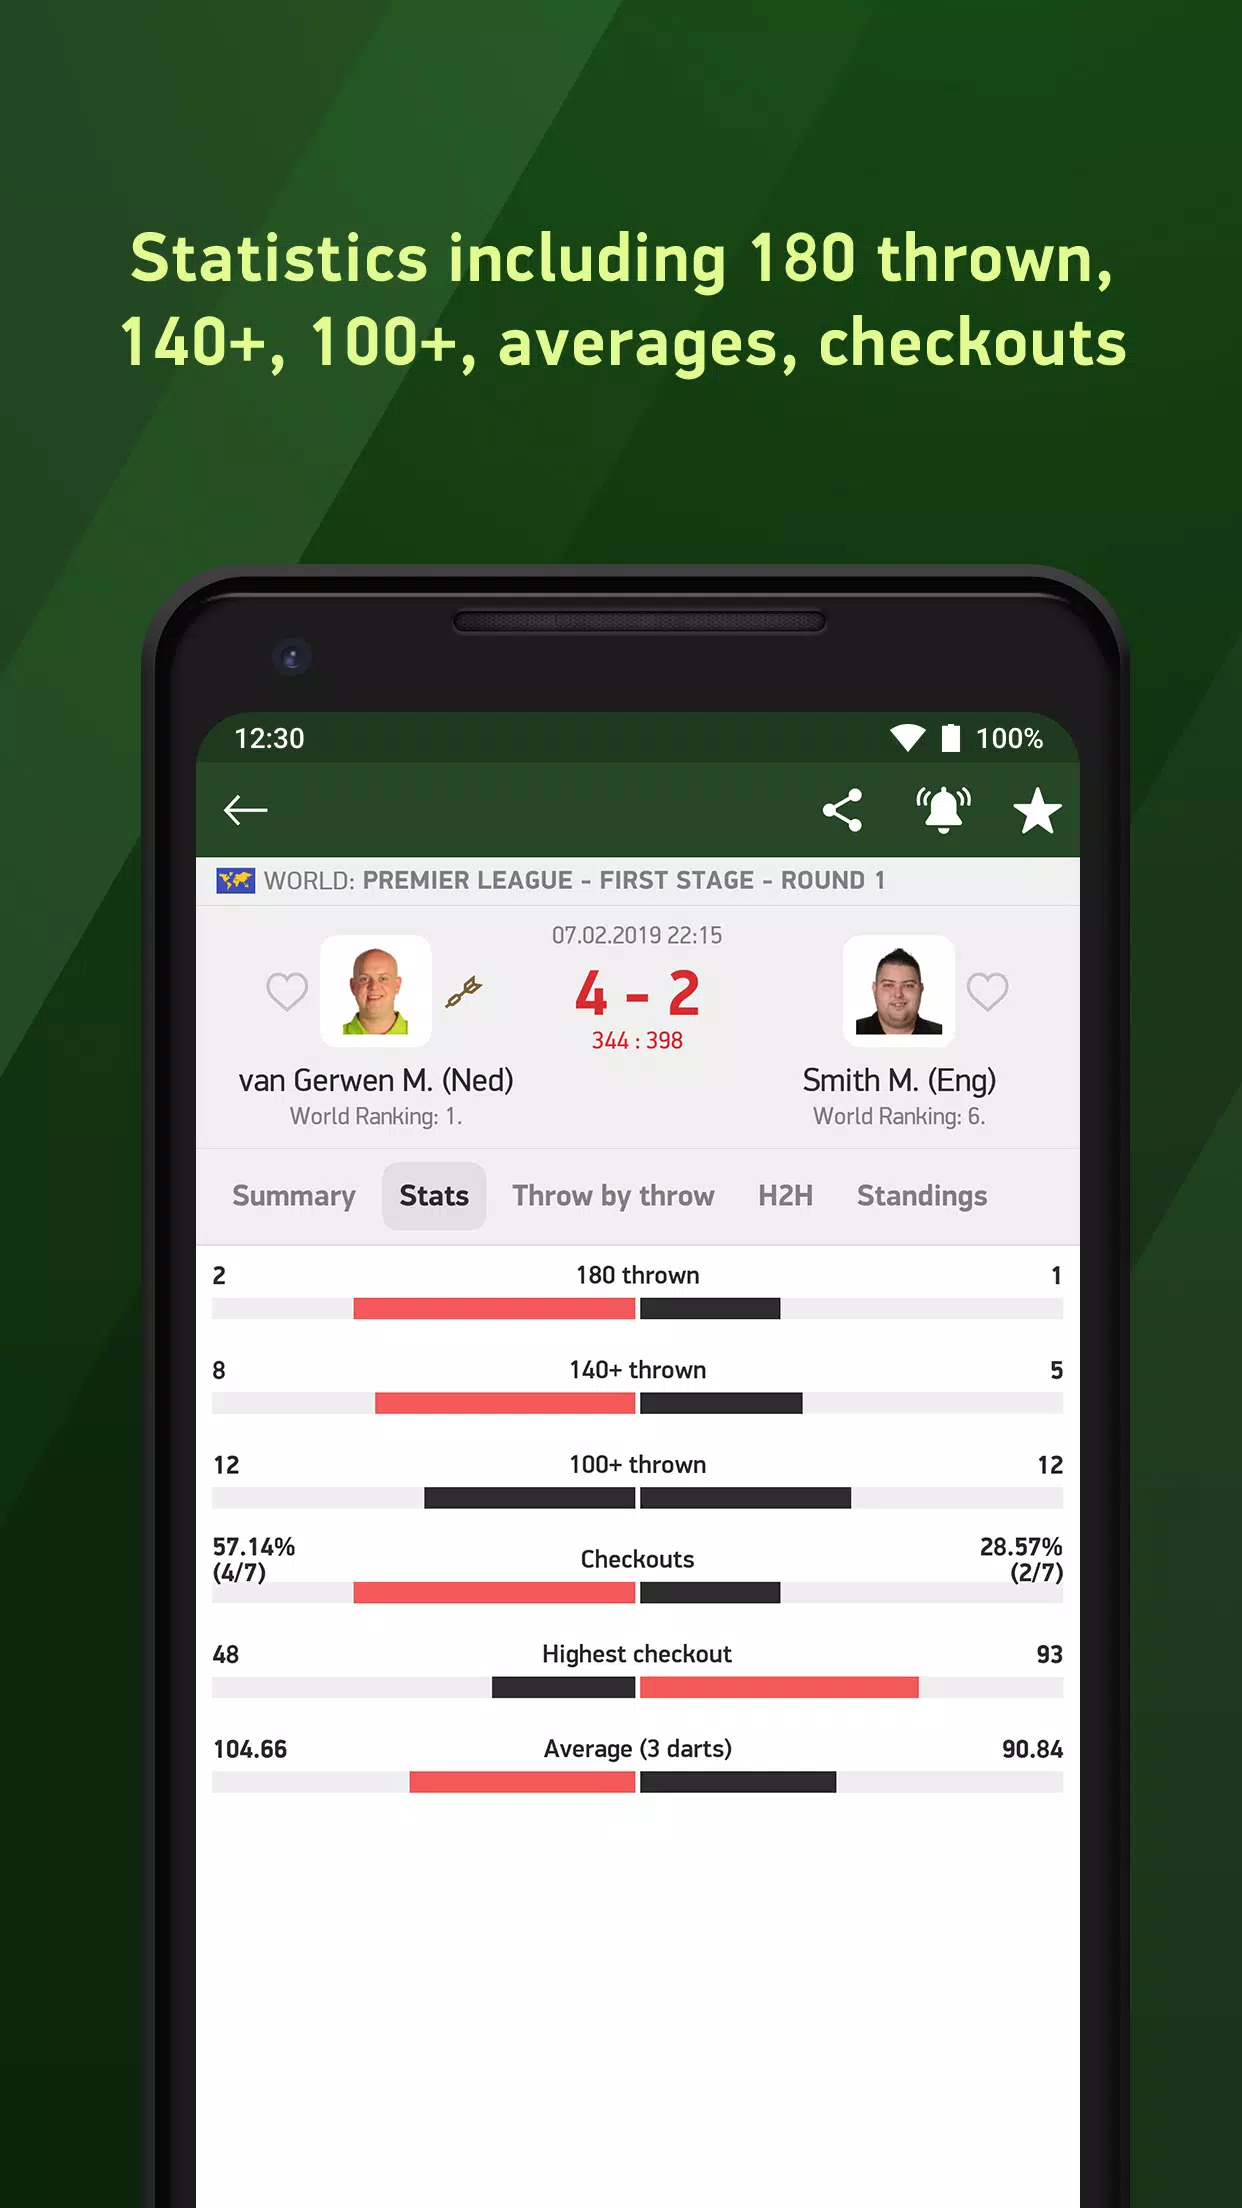 Darts 24 - live scores for Android